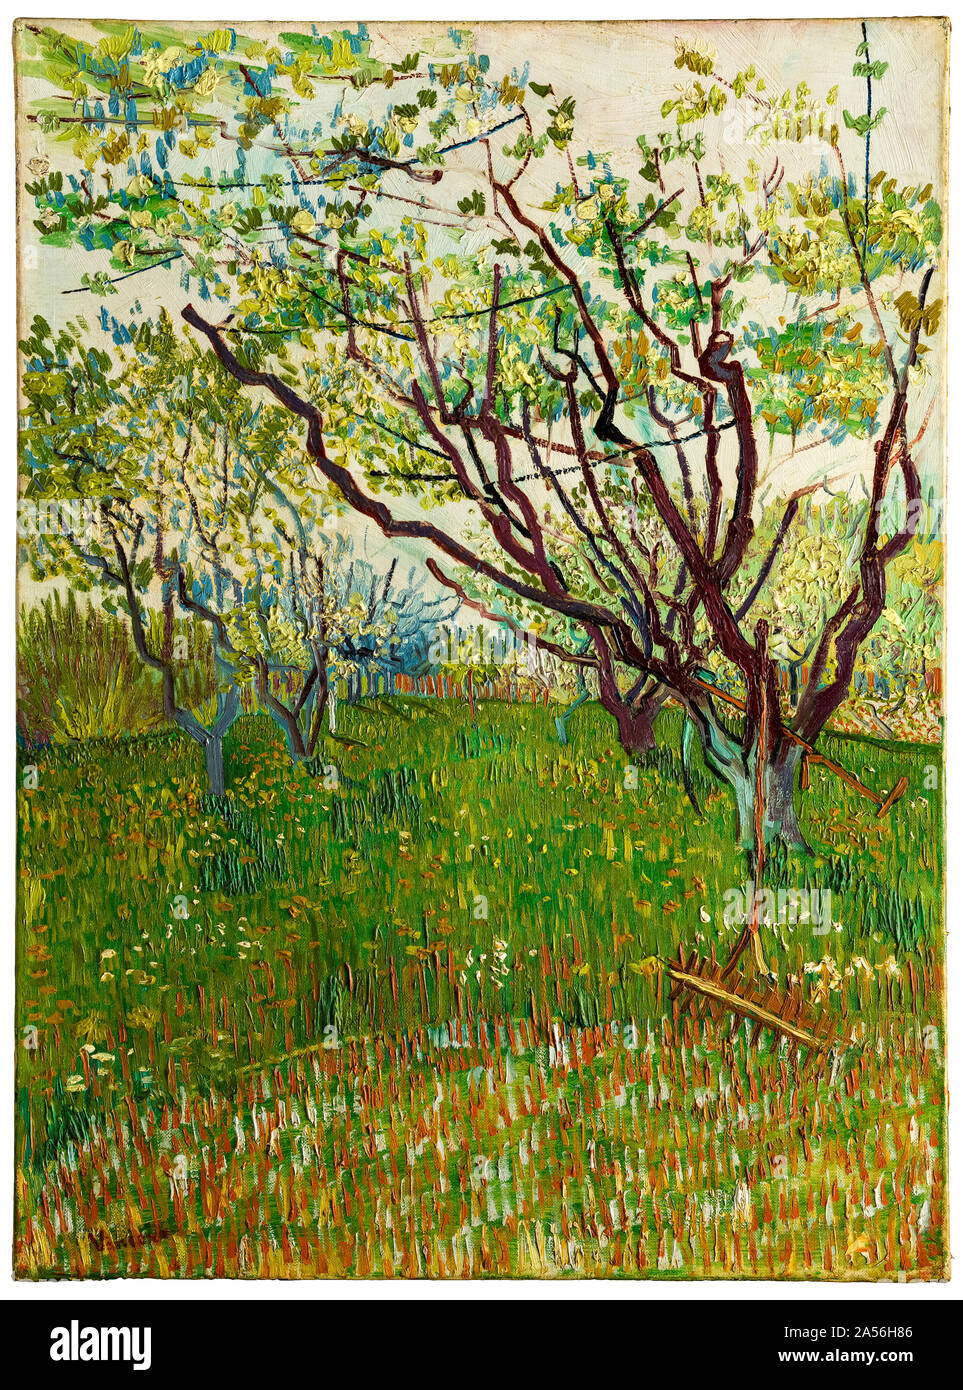 Vincent van Gogh, The Flowering Orchard, landscape painting, 1888 Stock Photo